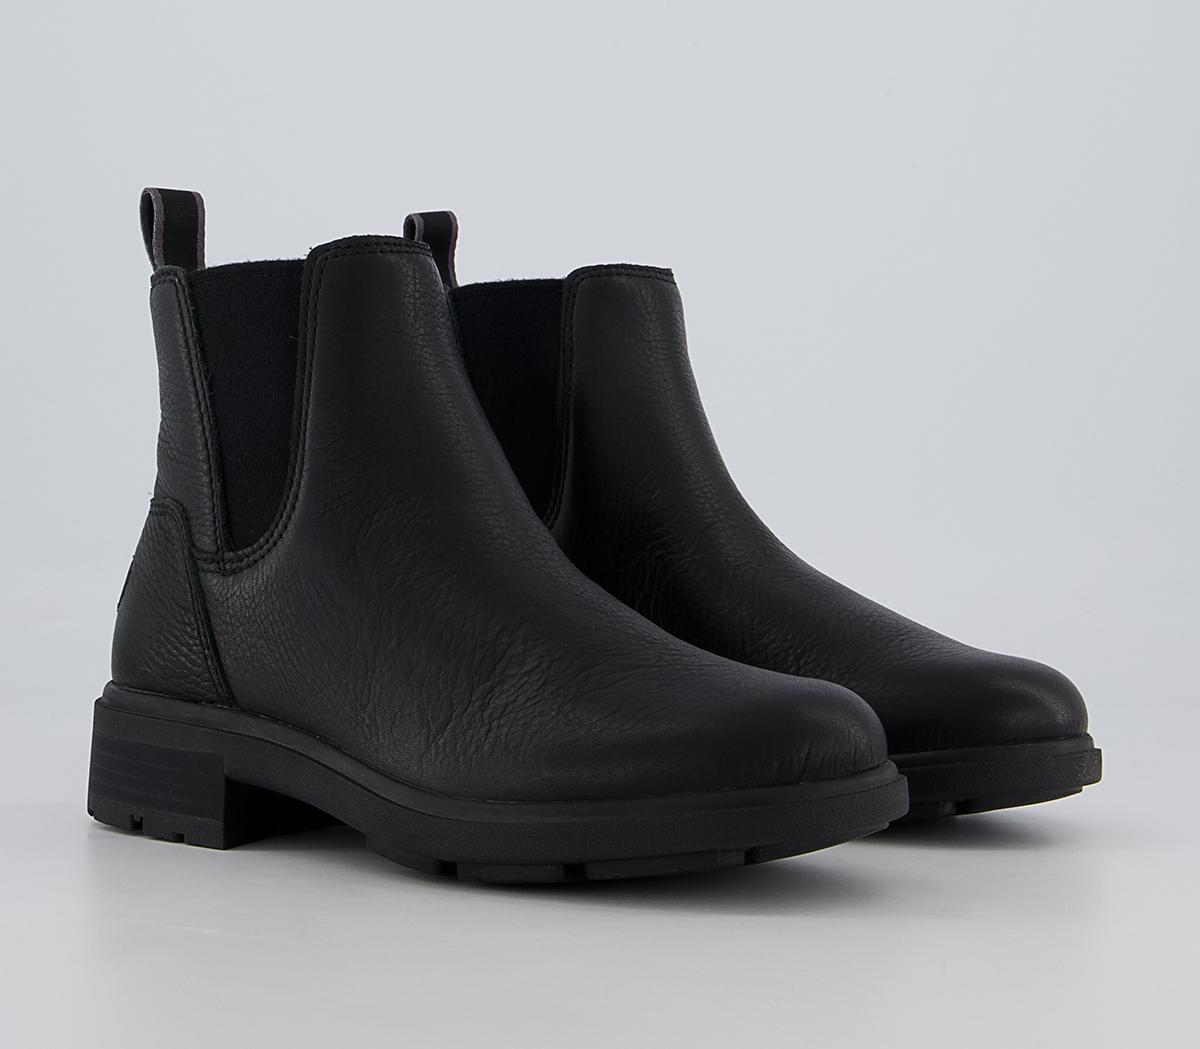 UGG Harrison Chelsea Boots Black - Women’s Sustainable Materials